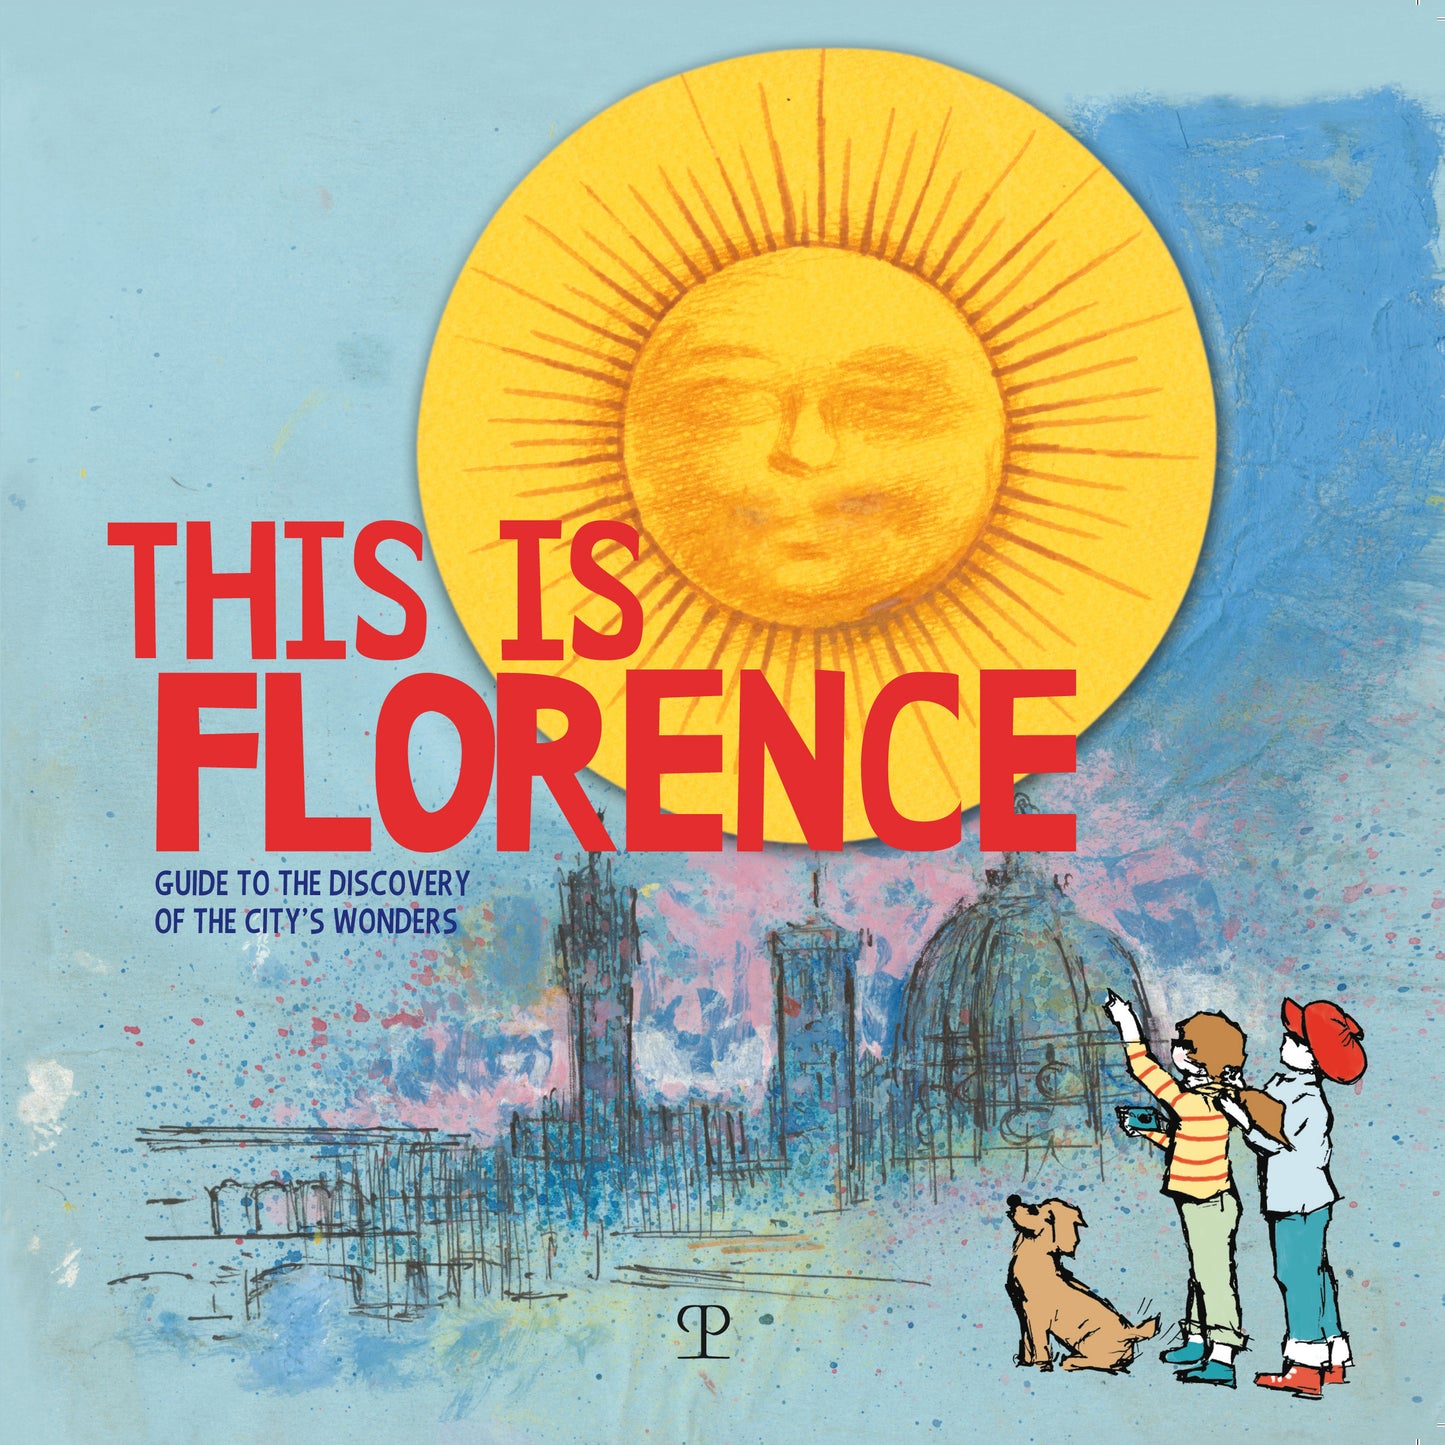 This is Florence